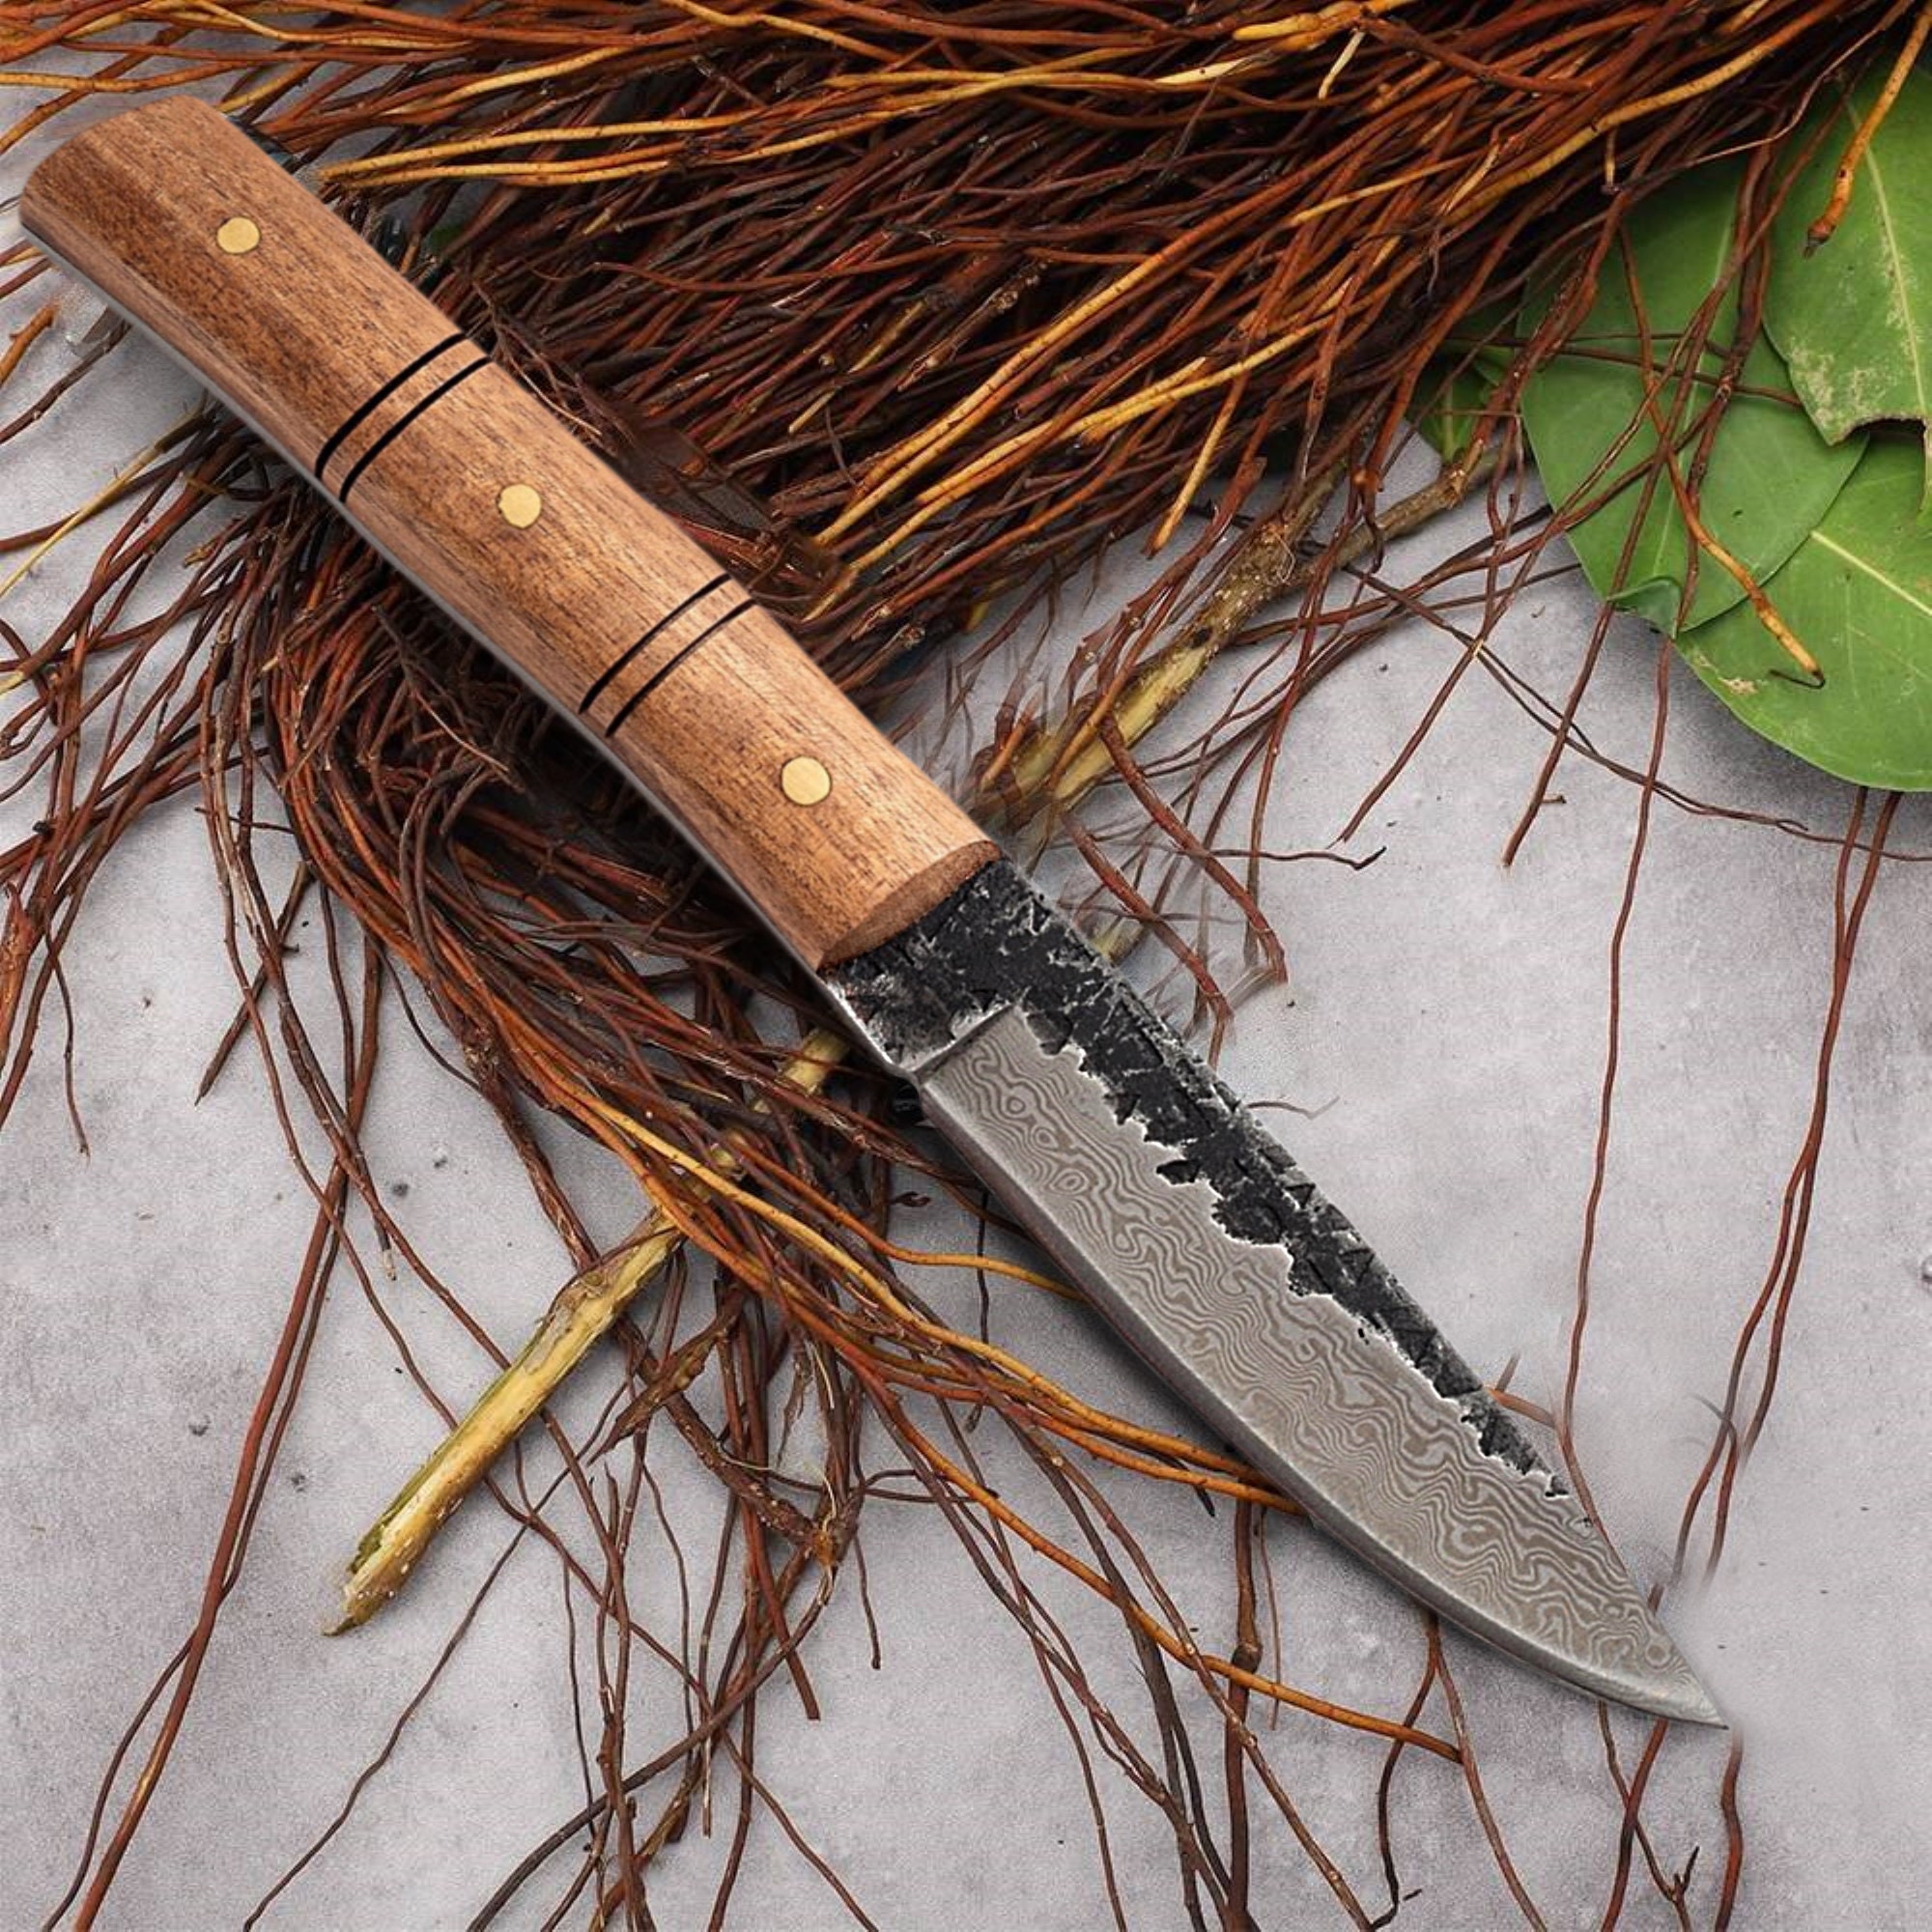 Opinel No.09 Oyster and Shellfish Knife Padouk Wood Handle, 6.5cm.  Stainless Blade, Virobloc Locking. 